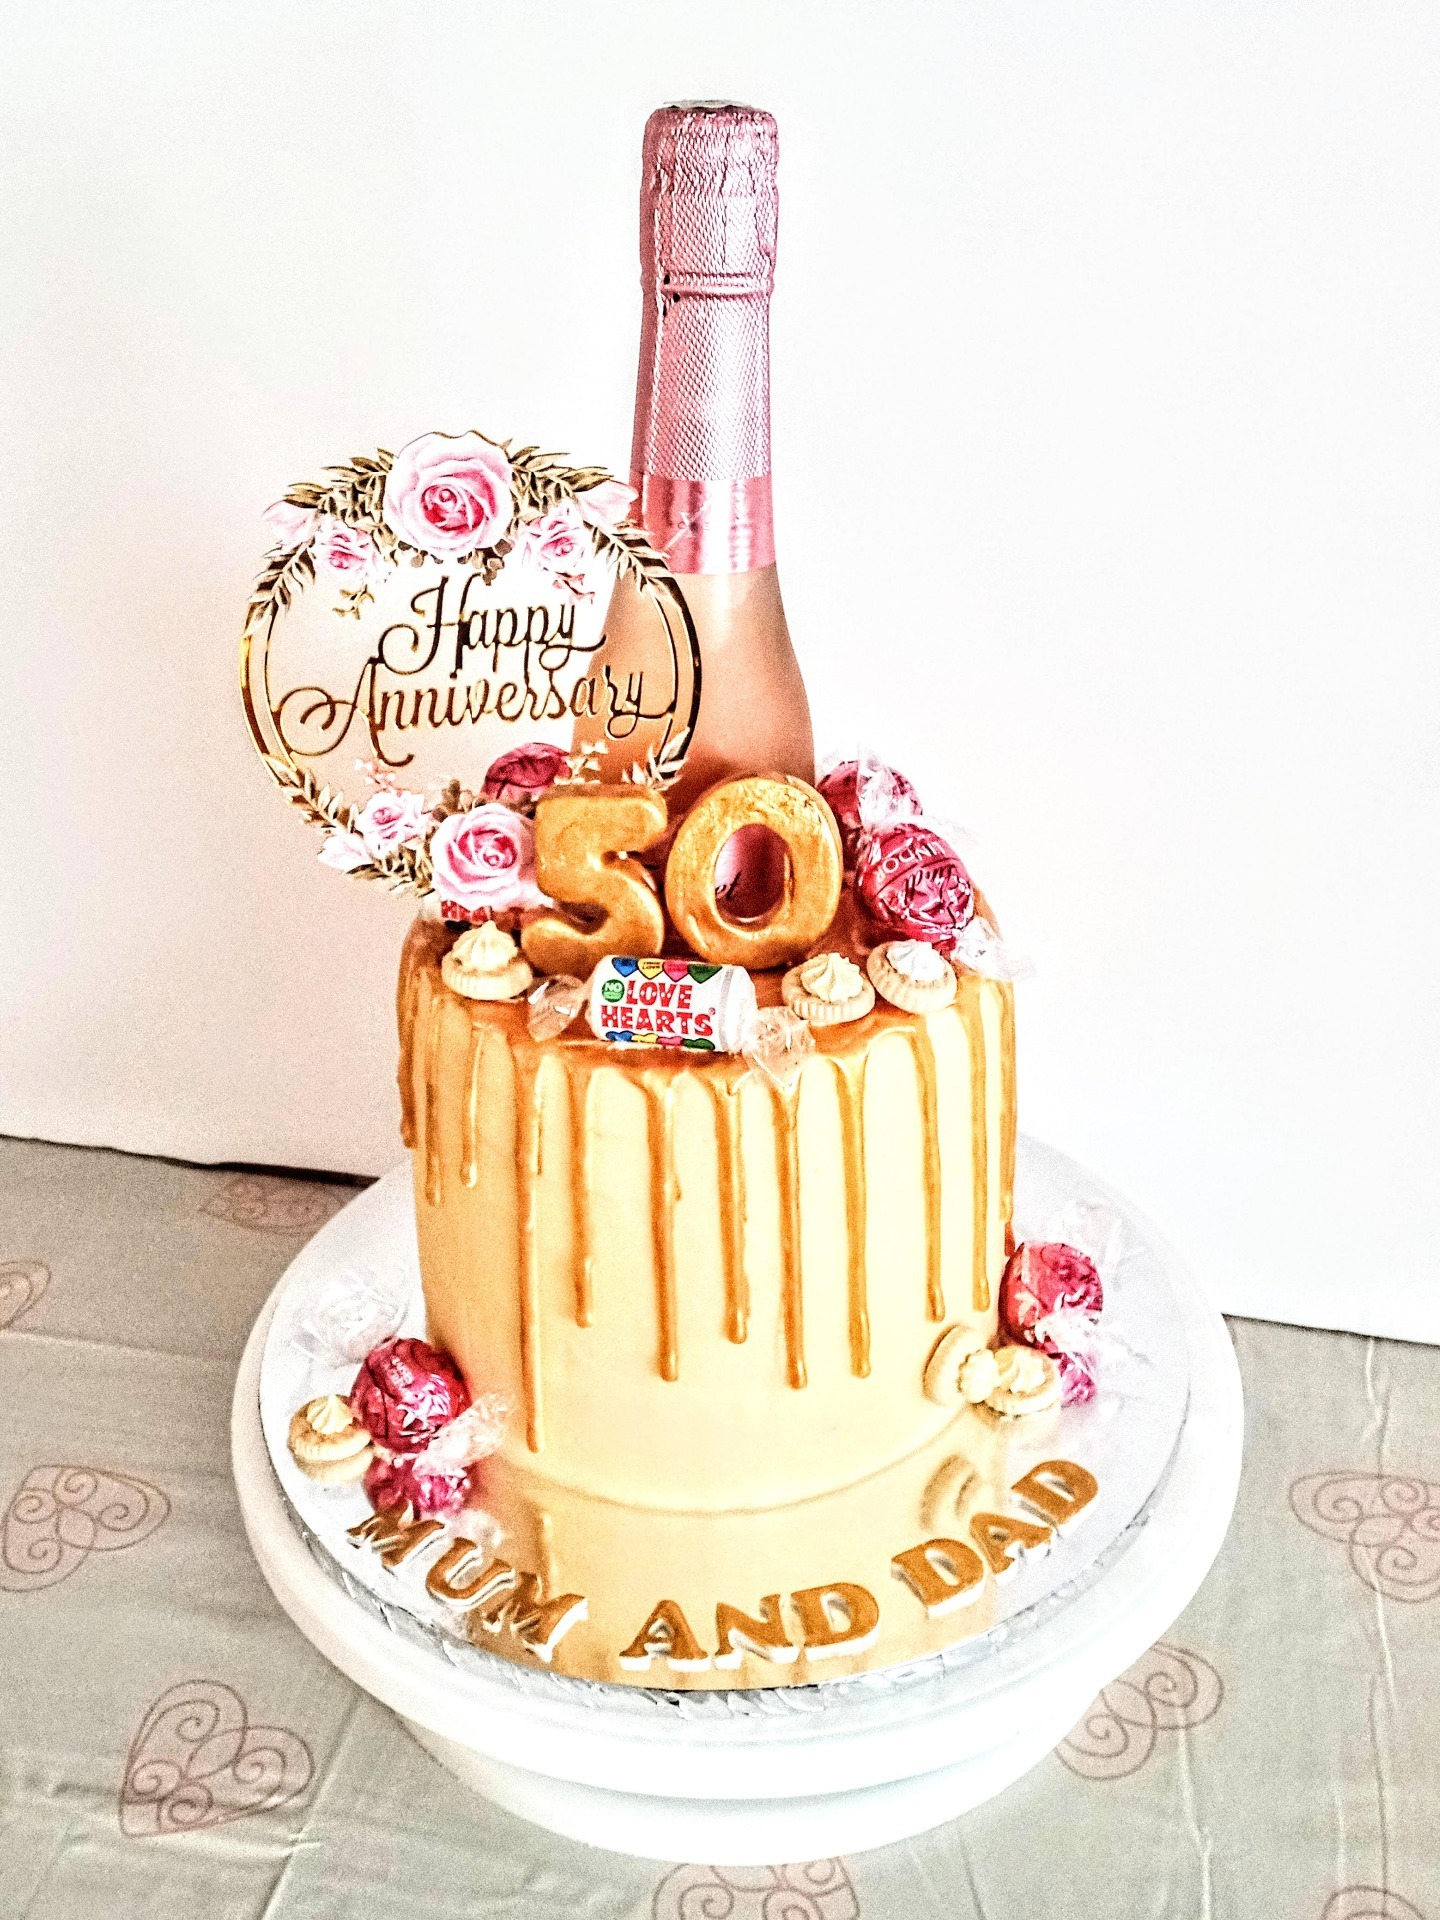 50th wedding drip cake with champagne bottle